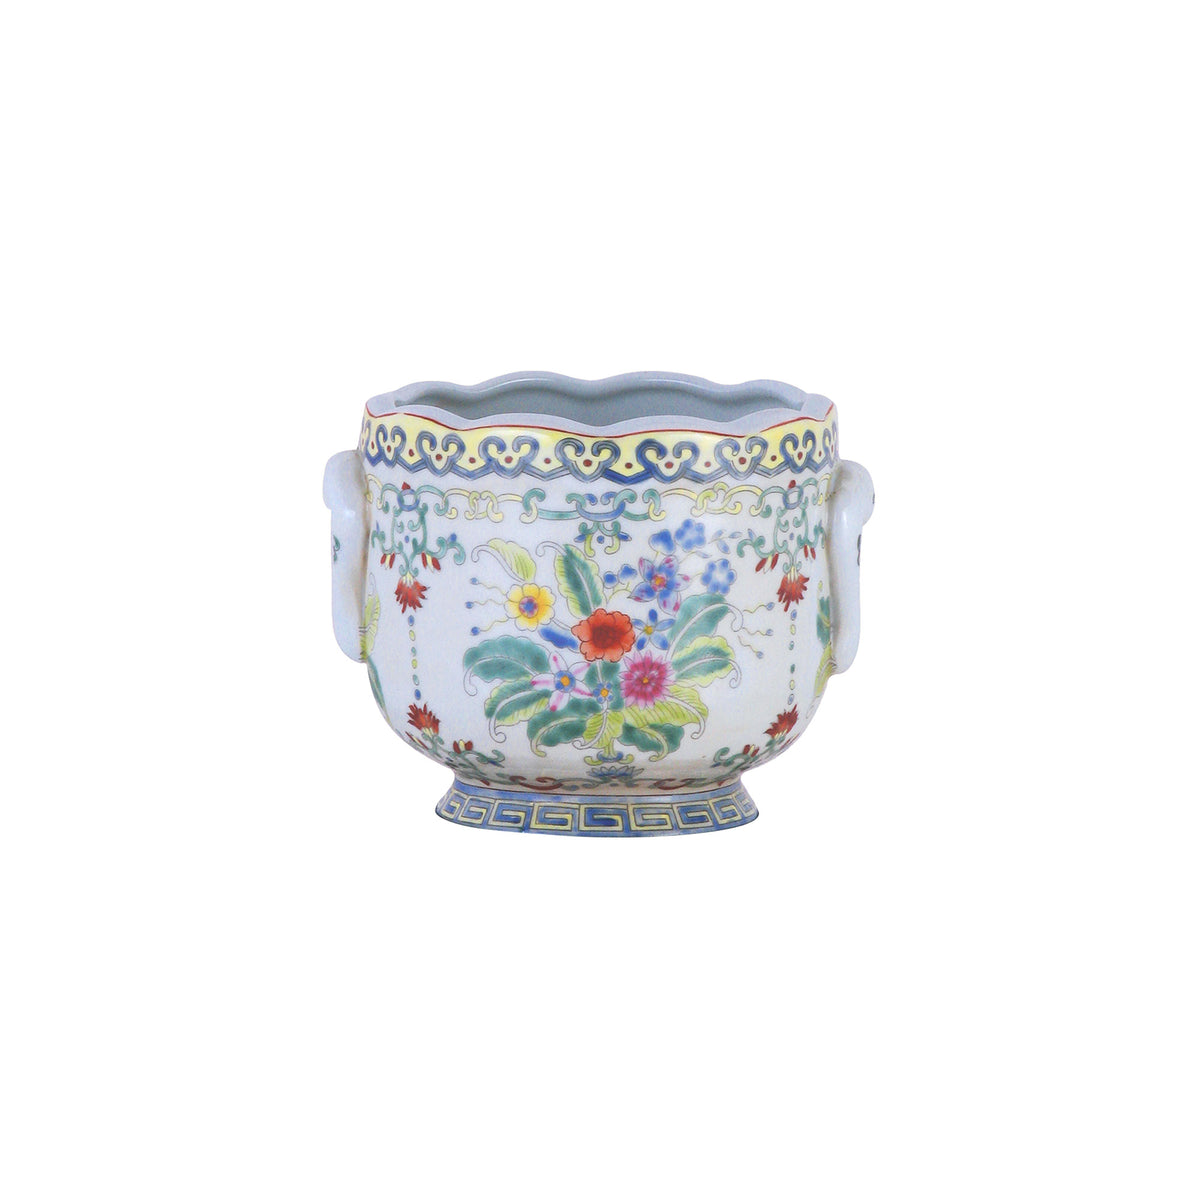 Bright Blossoms Floral Cachepot with Scalloped Edge